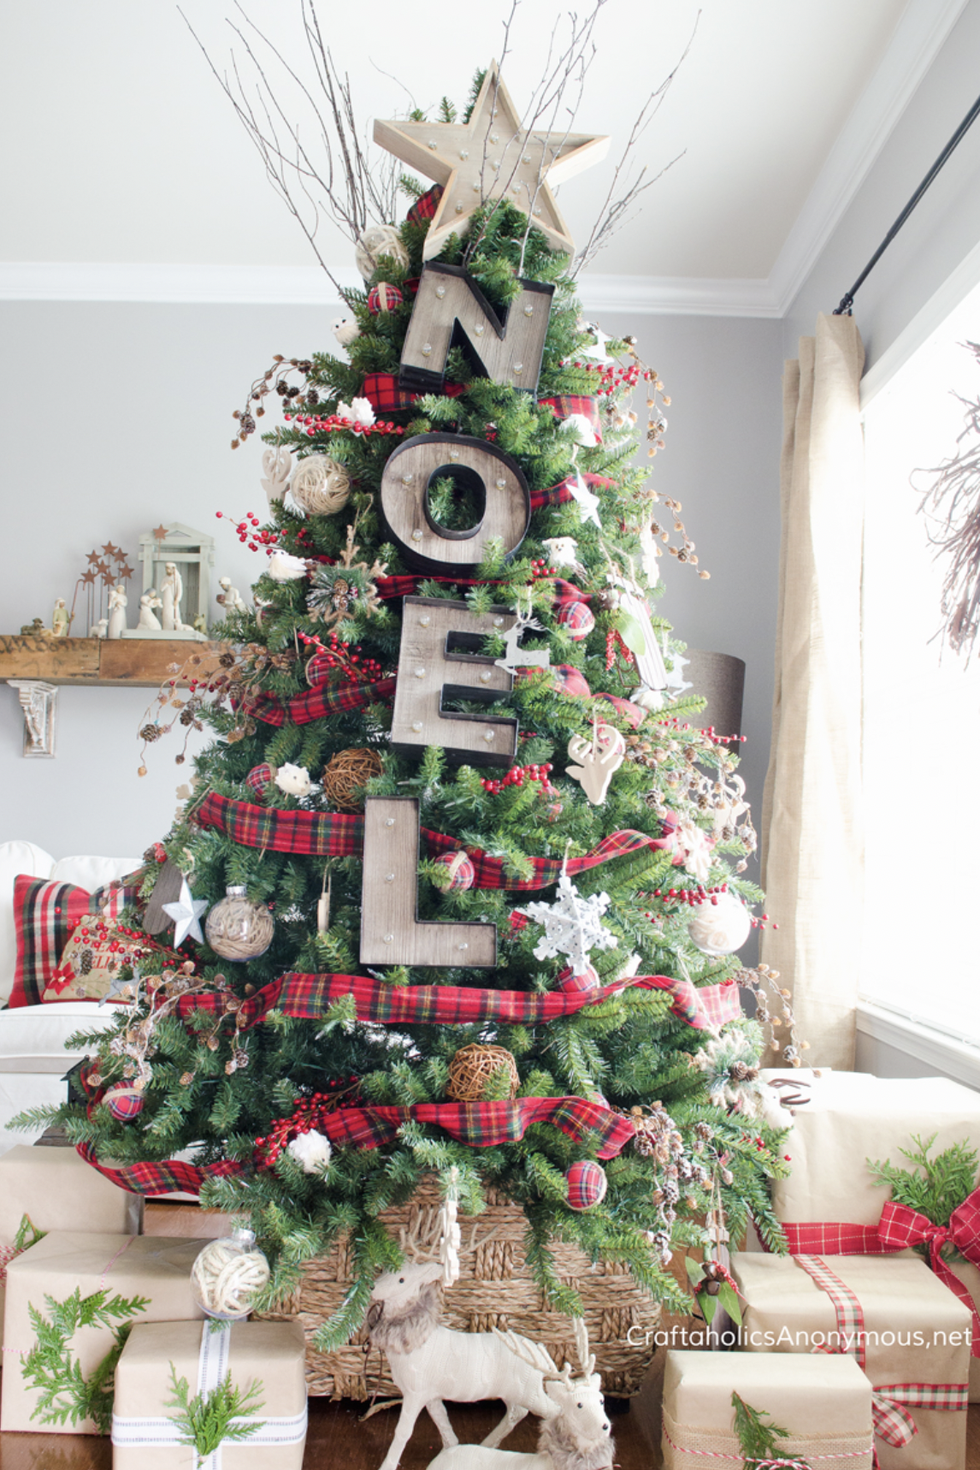 How to Decorate a Christmas Tree Like a Designer - The Lived-in Look